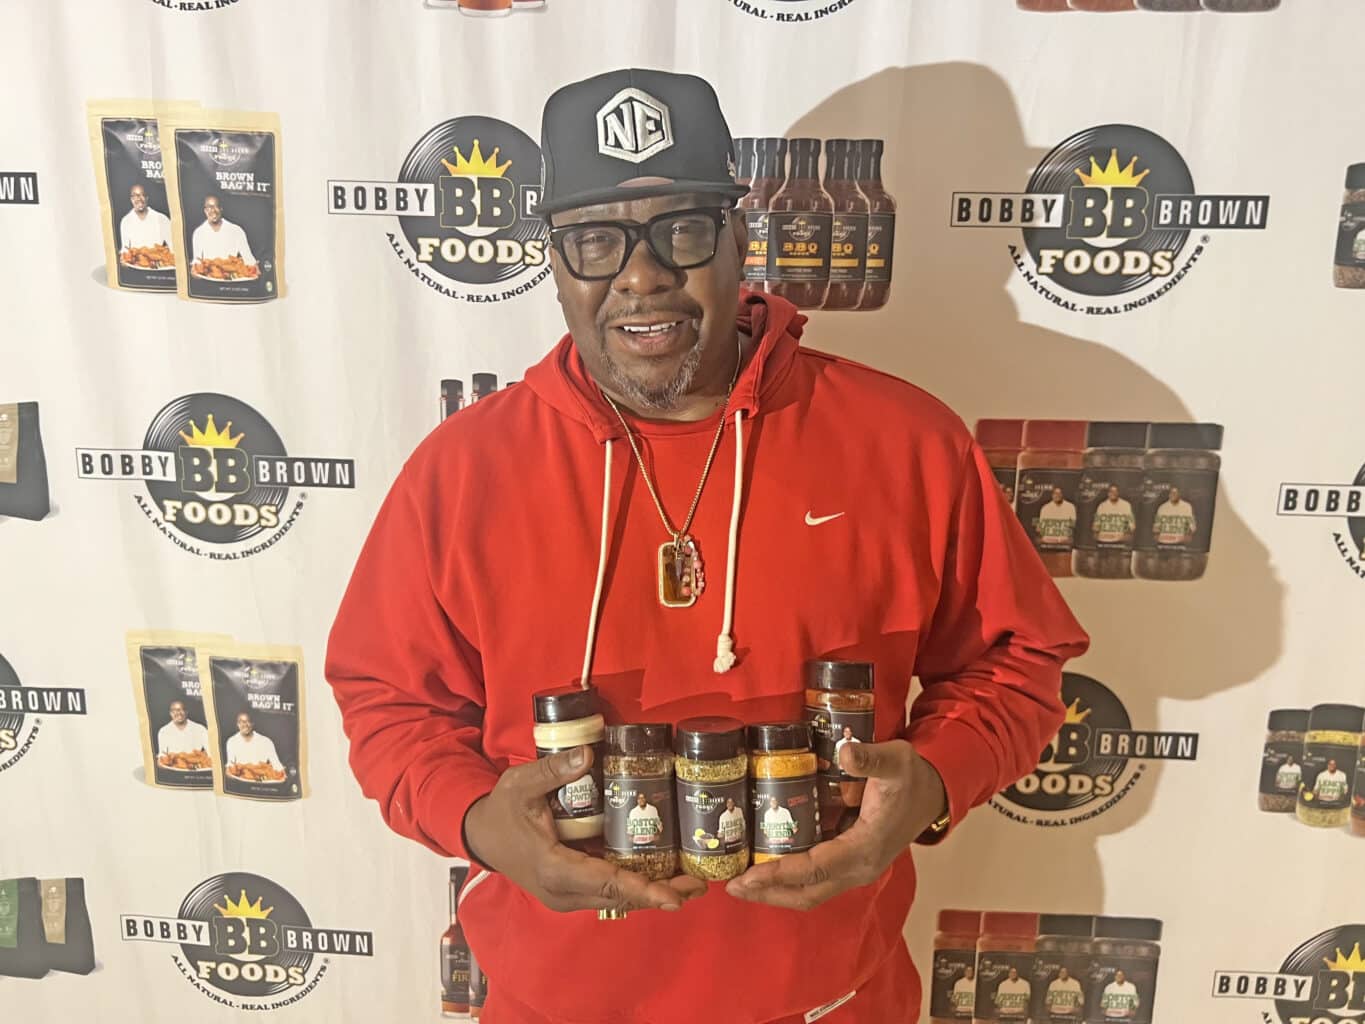 R&B singer Bobby Brown with Bobby Brown Foods products